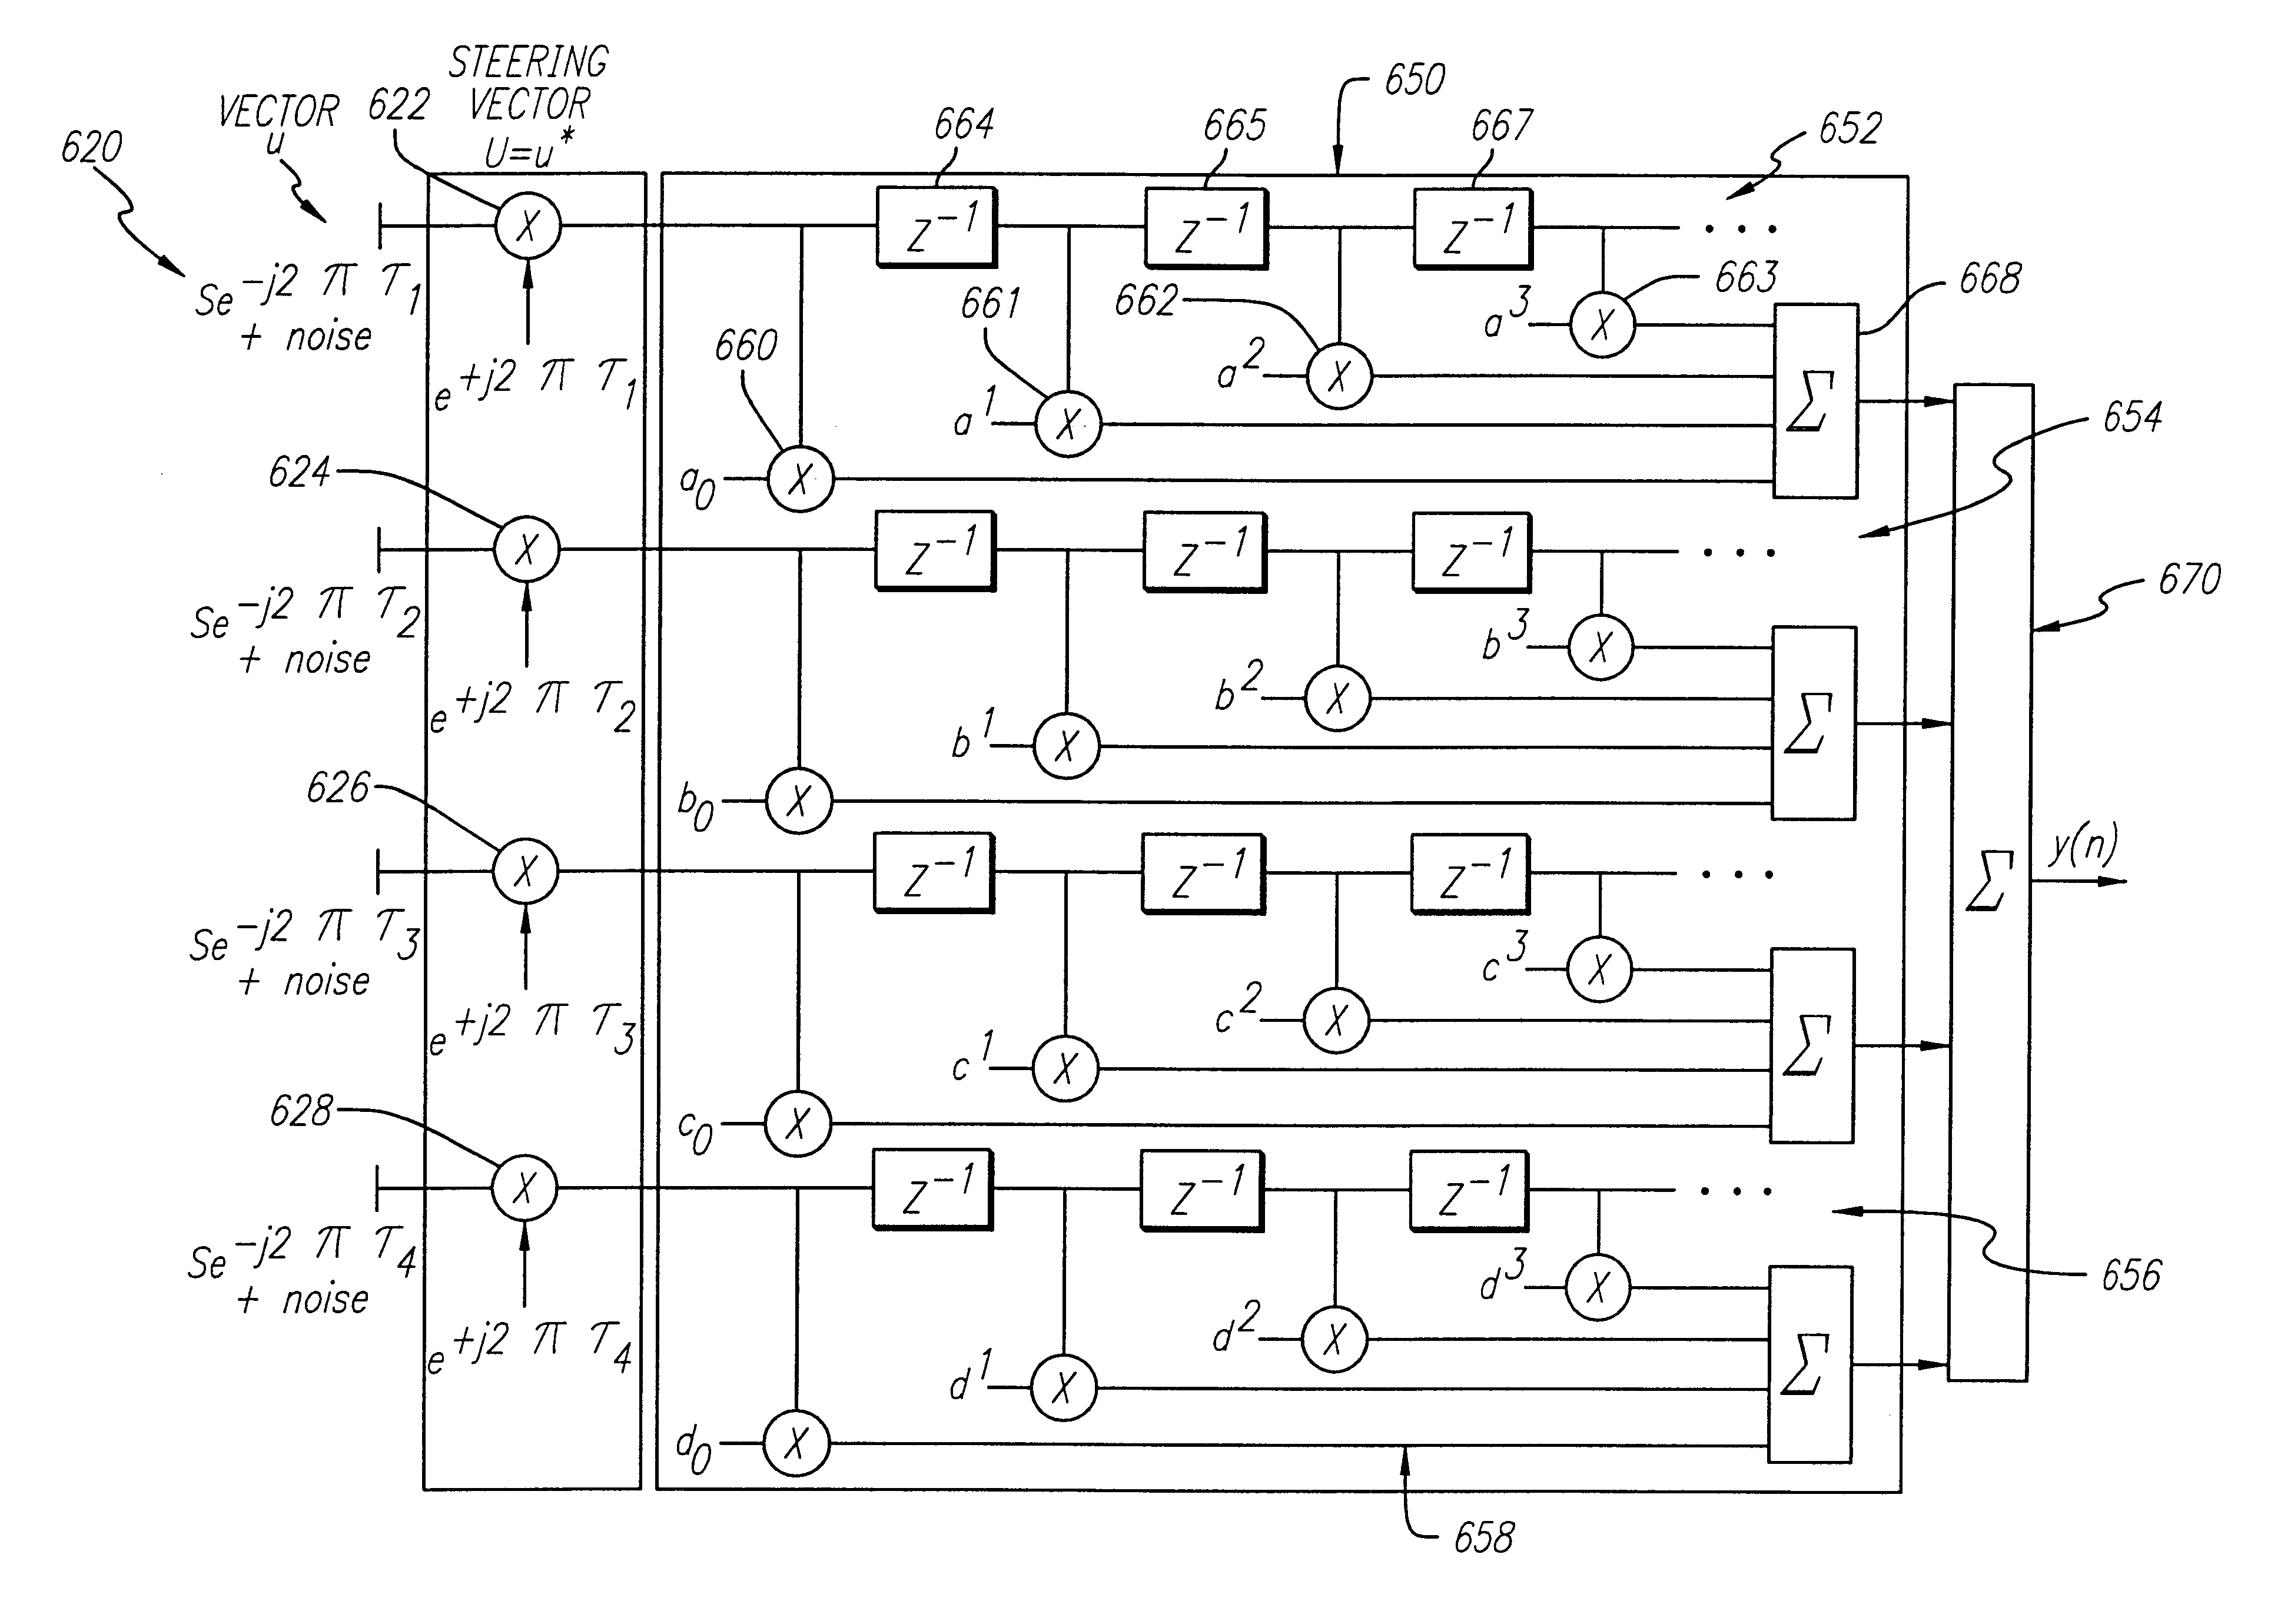 Beamforming and interference cancellation system using general purpose filter architecture